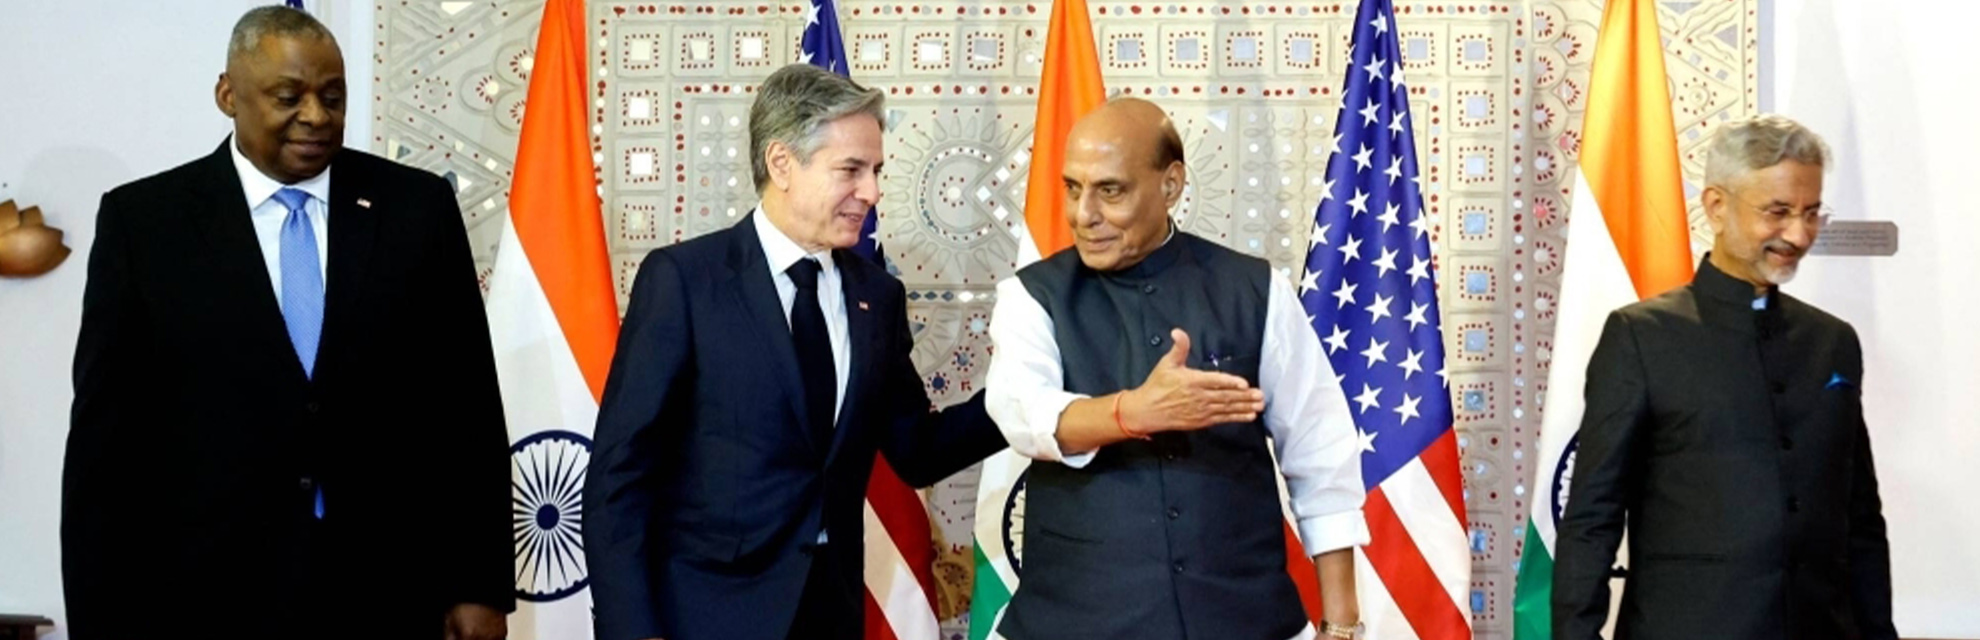 U.S. pulling India closer to West as strategic interests converge